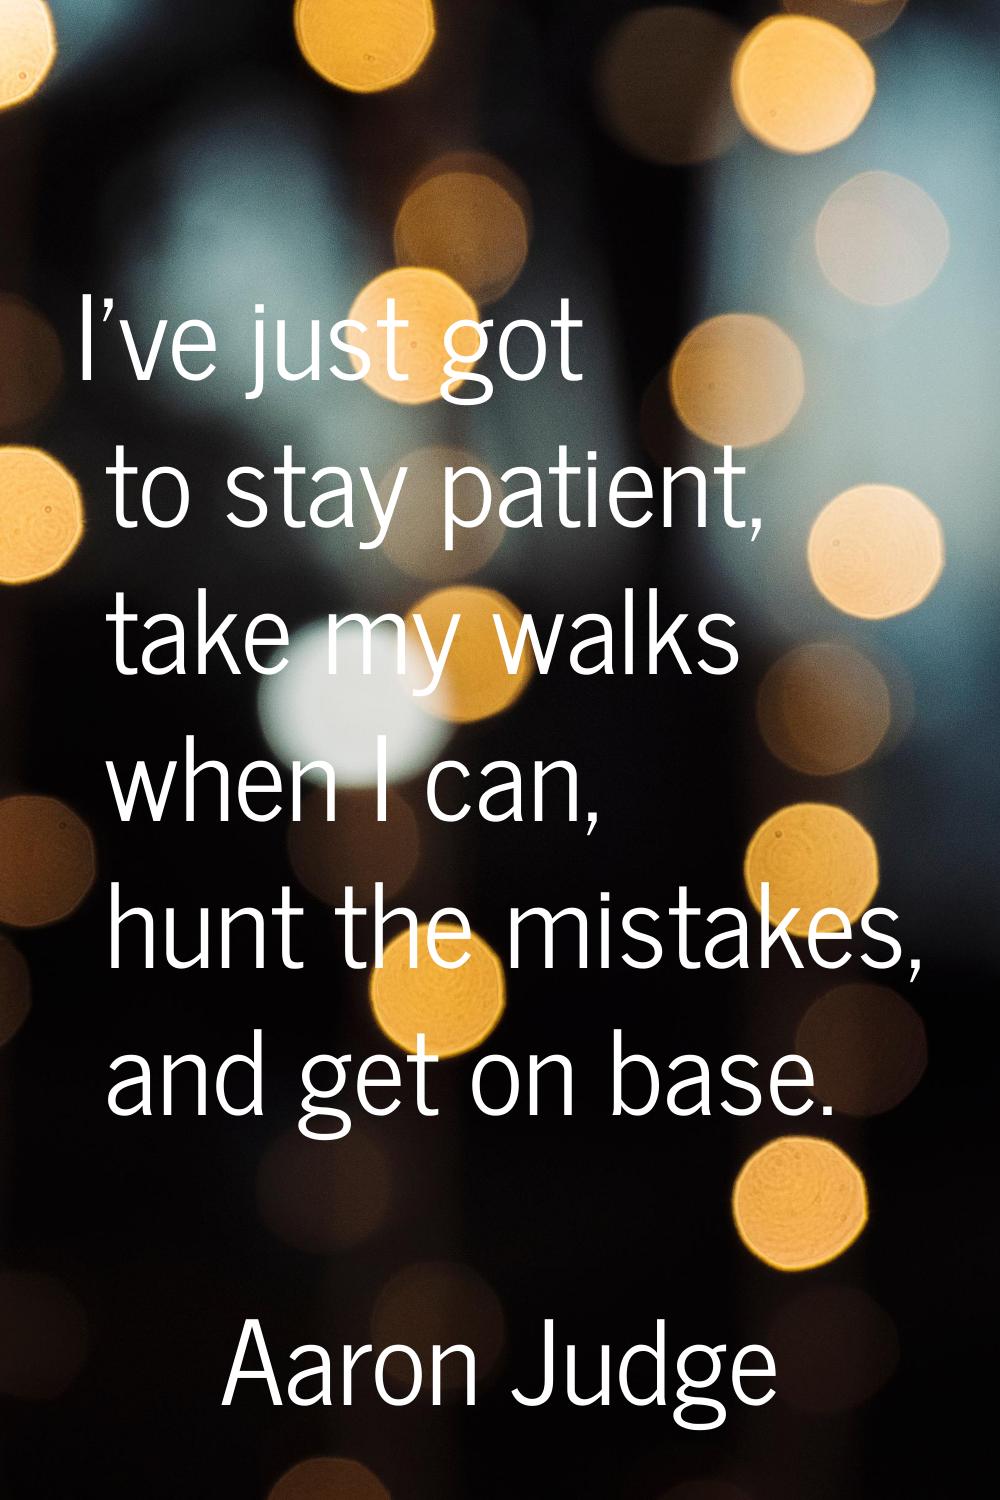 I've just got to stay patient, take my walks when I can, hunt the mistakes, and get on base.